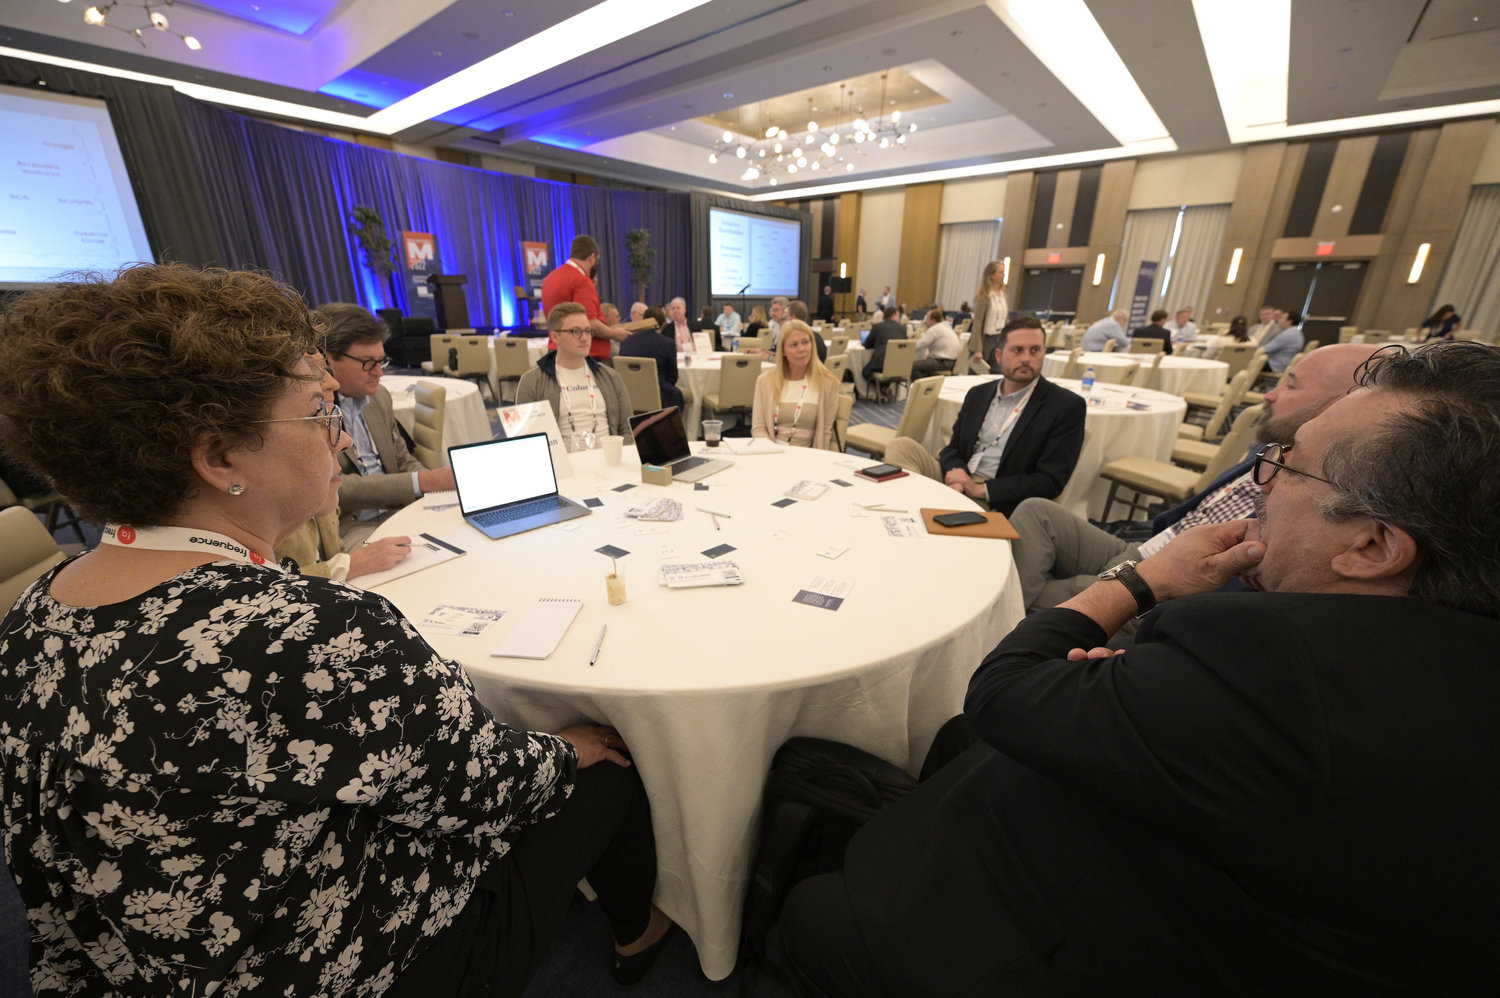 At this Roundtable, the discussion centered on how Column is working with publishers and state press associations to modernize the customer experience related to public notices. (Photo by Phelan M. Ebenhack)